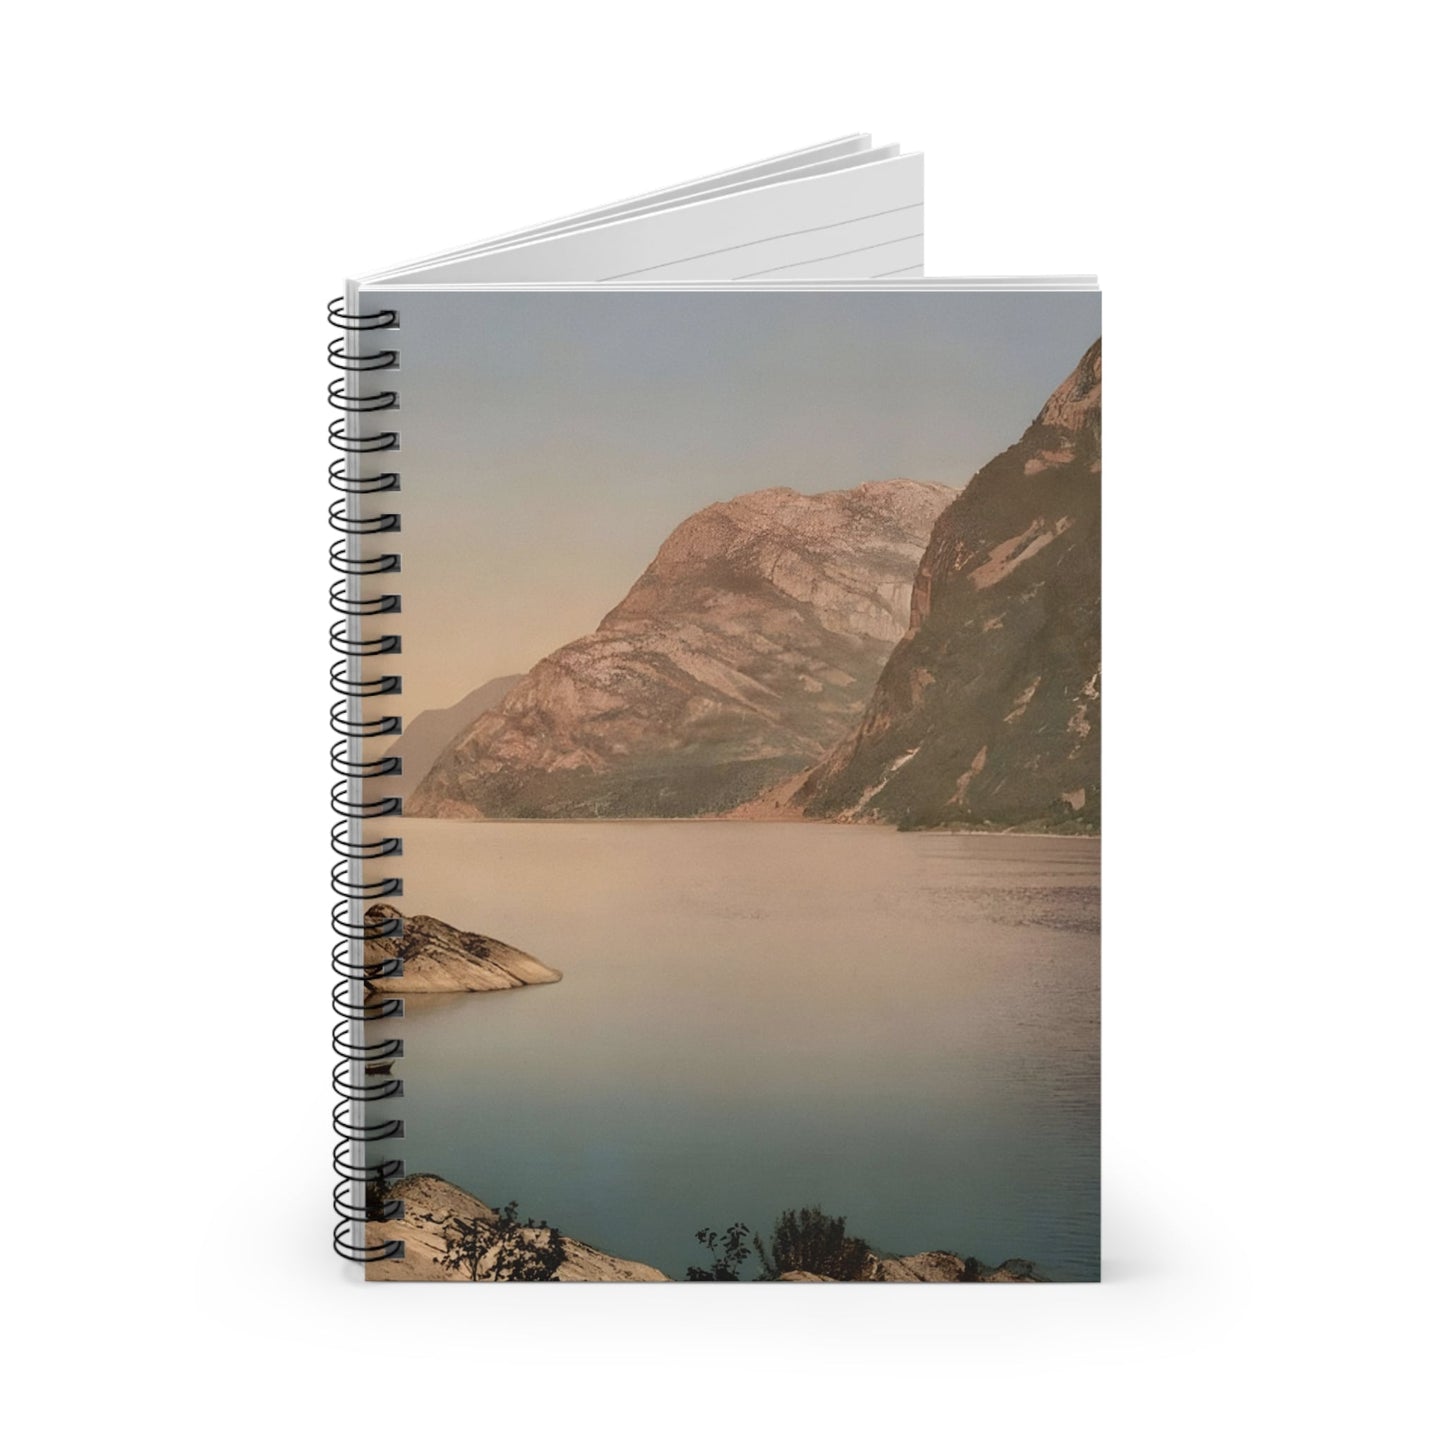 Summer Mountains Spiral Notebook Standing up on White Desk